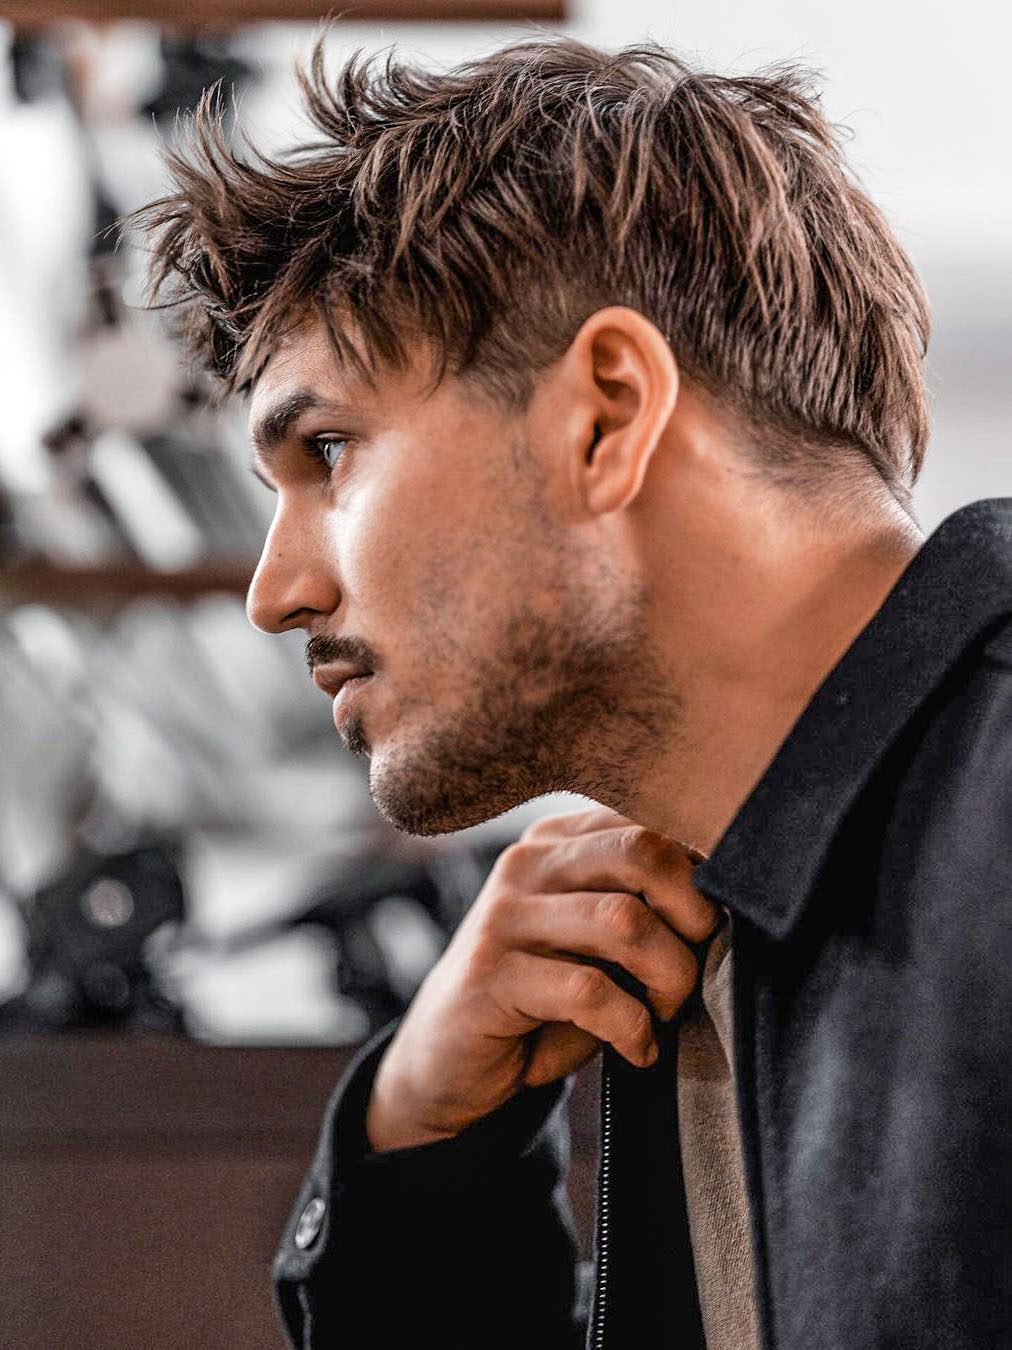 The Most Attractive Women's Hairstyles According to Men